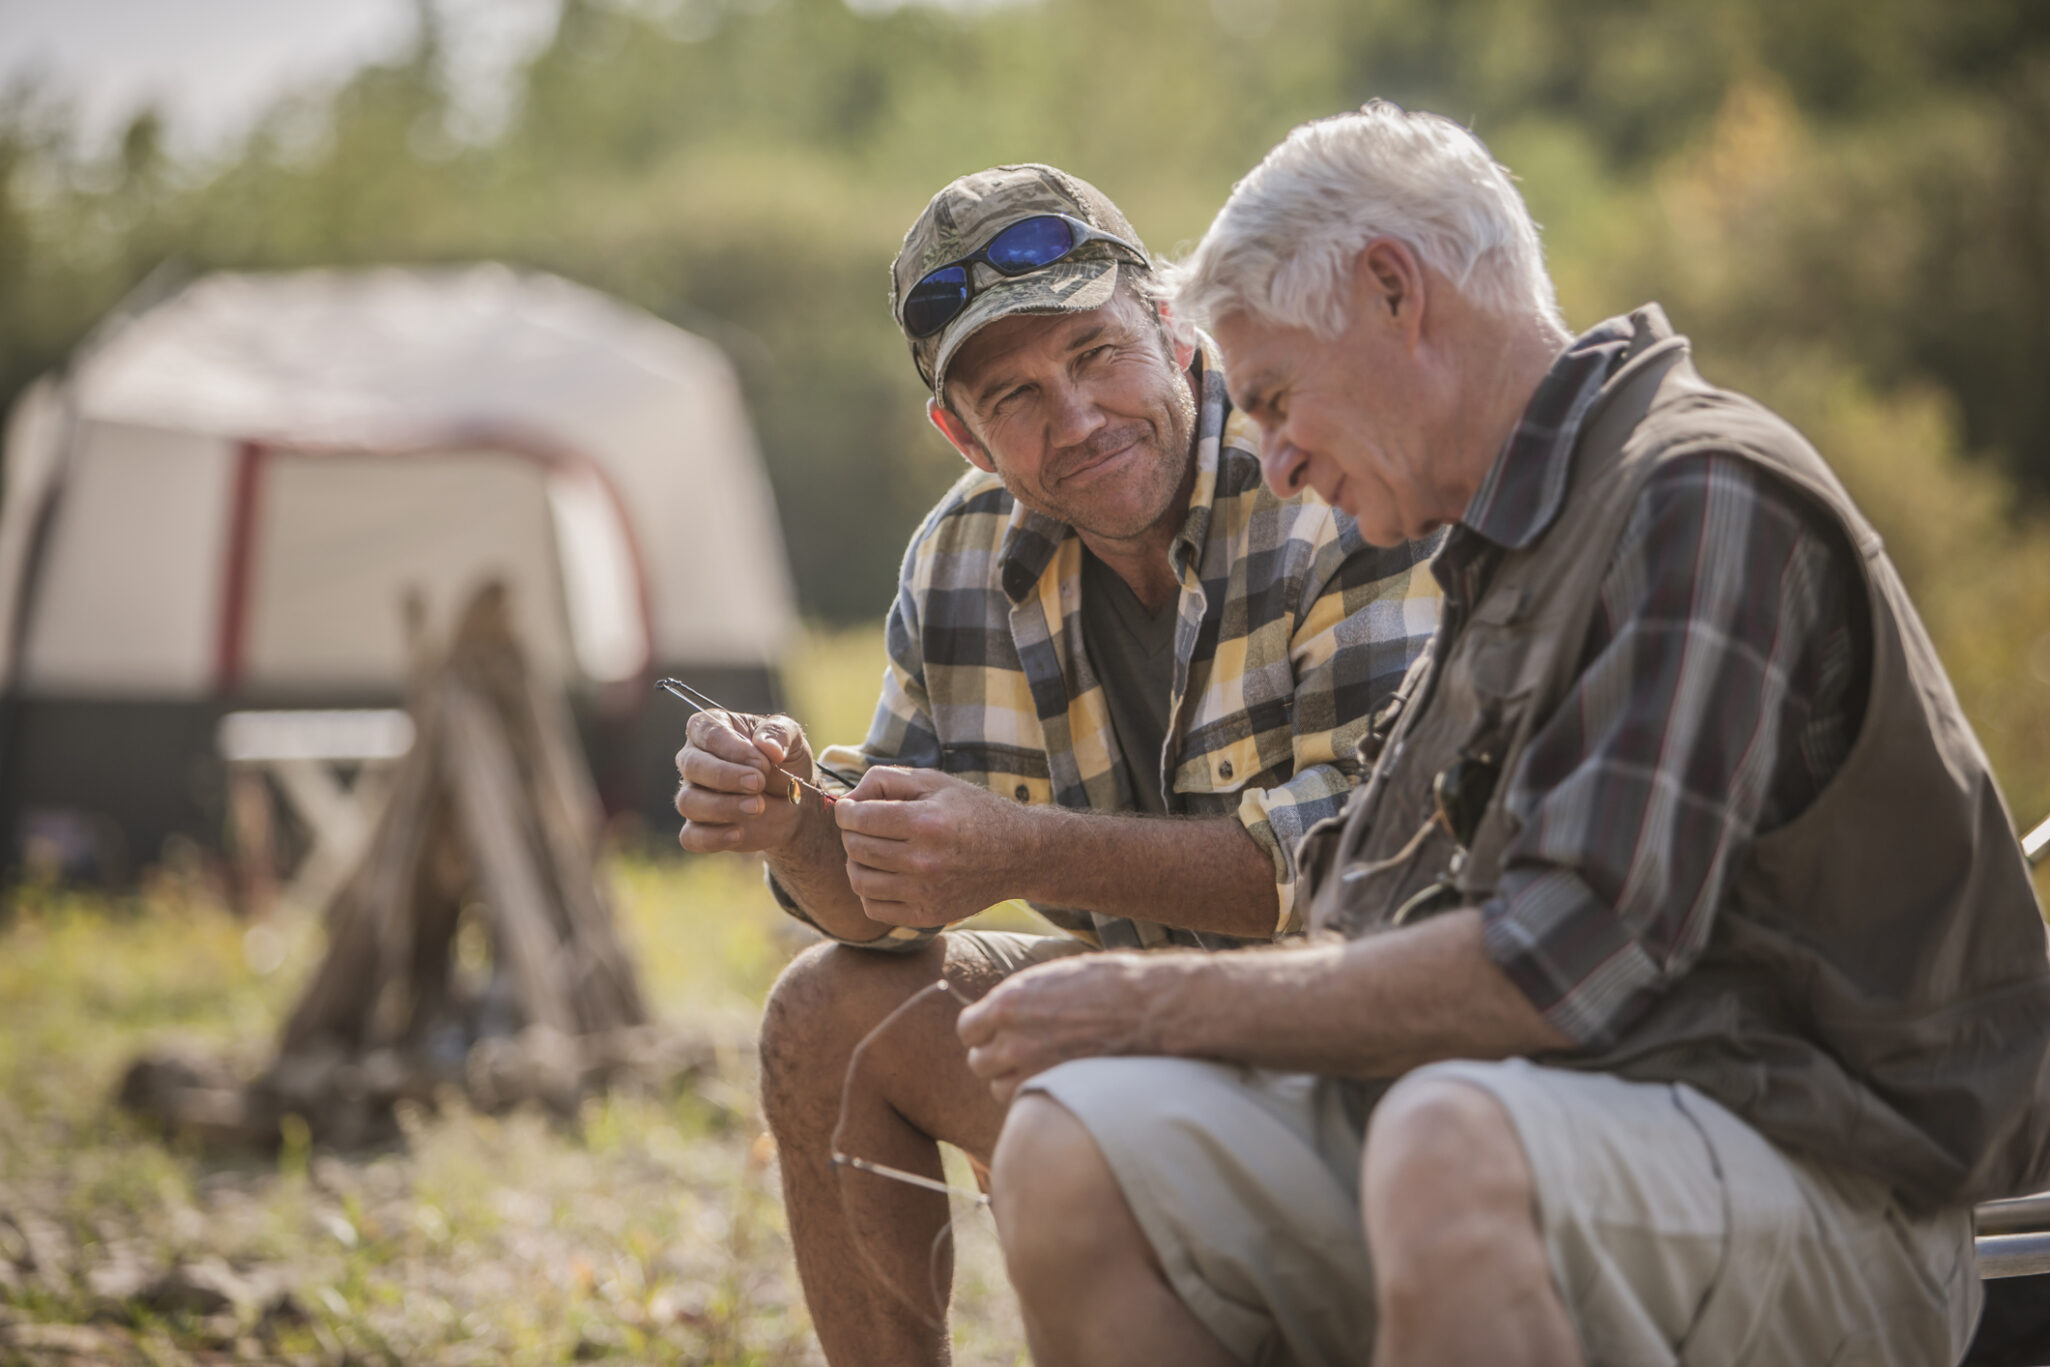 Two older men setting up fishing lures while at a campsite